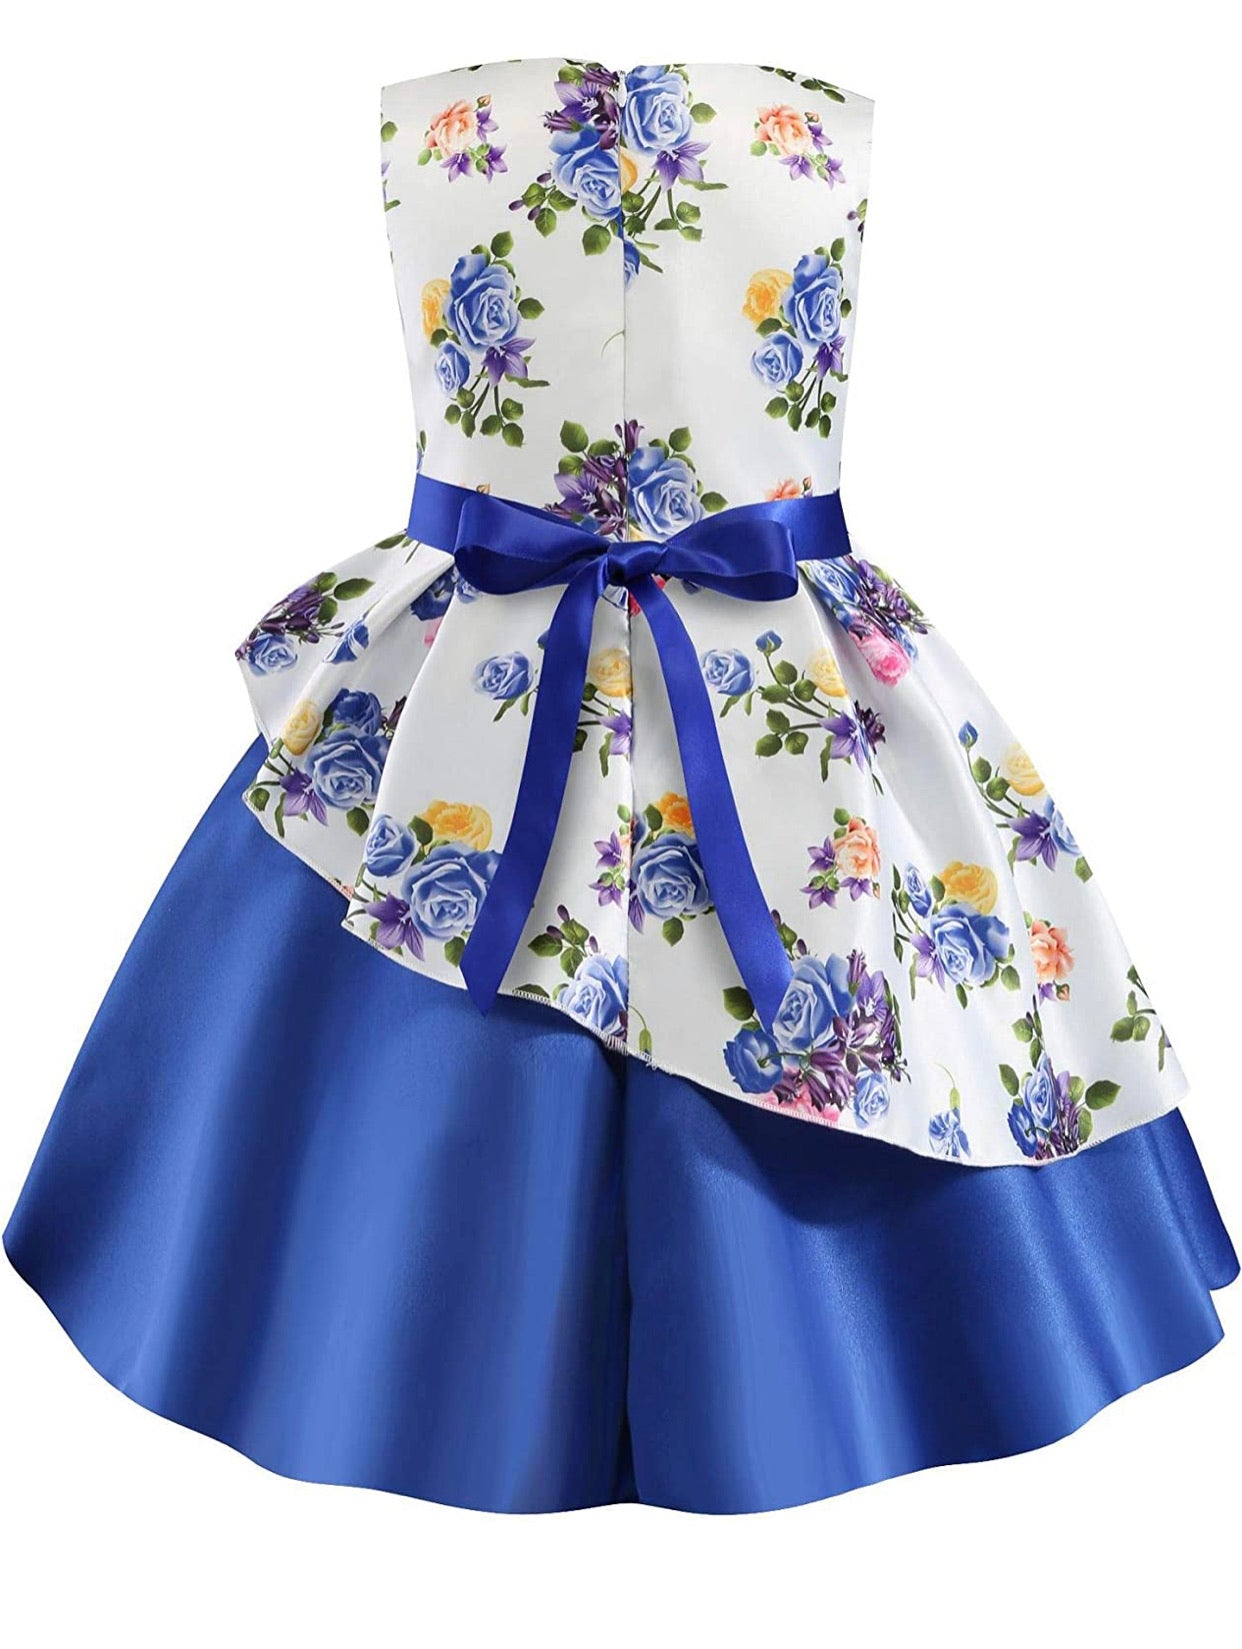 Mini & Short Dresses in the size 8-9 years for Kids on sale | FASHIOLA INDIA